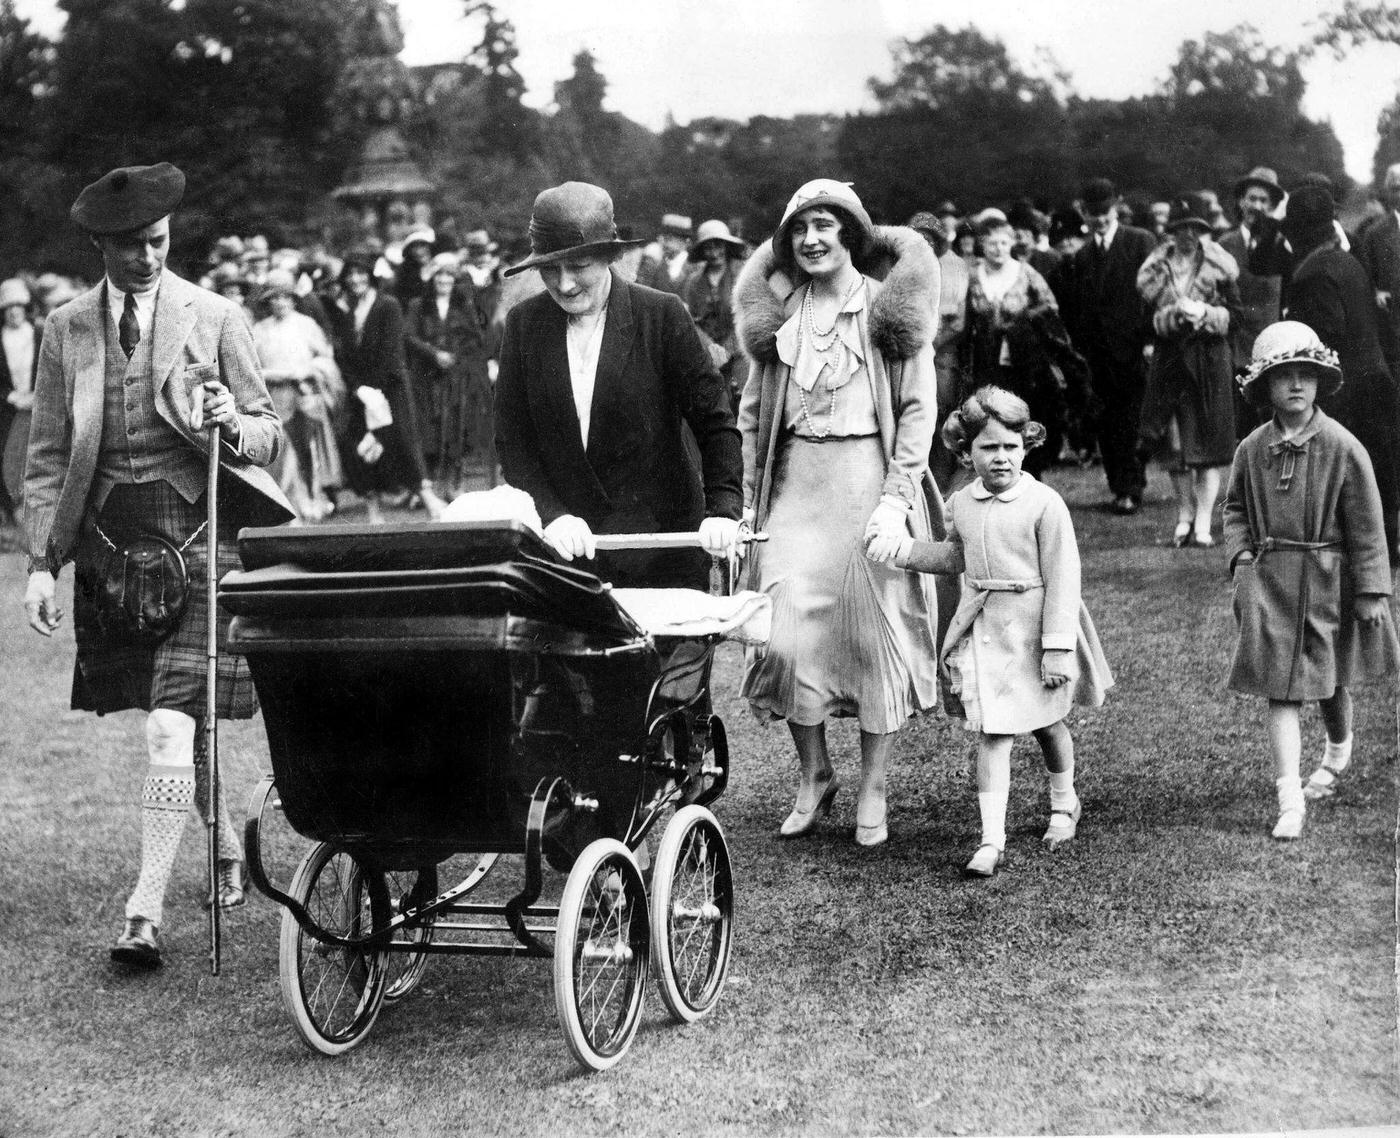 King George VI and Queen Elizabeth with Princesses Elizabeth and Margaret in a pram at a garden party, 1931.